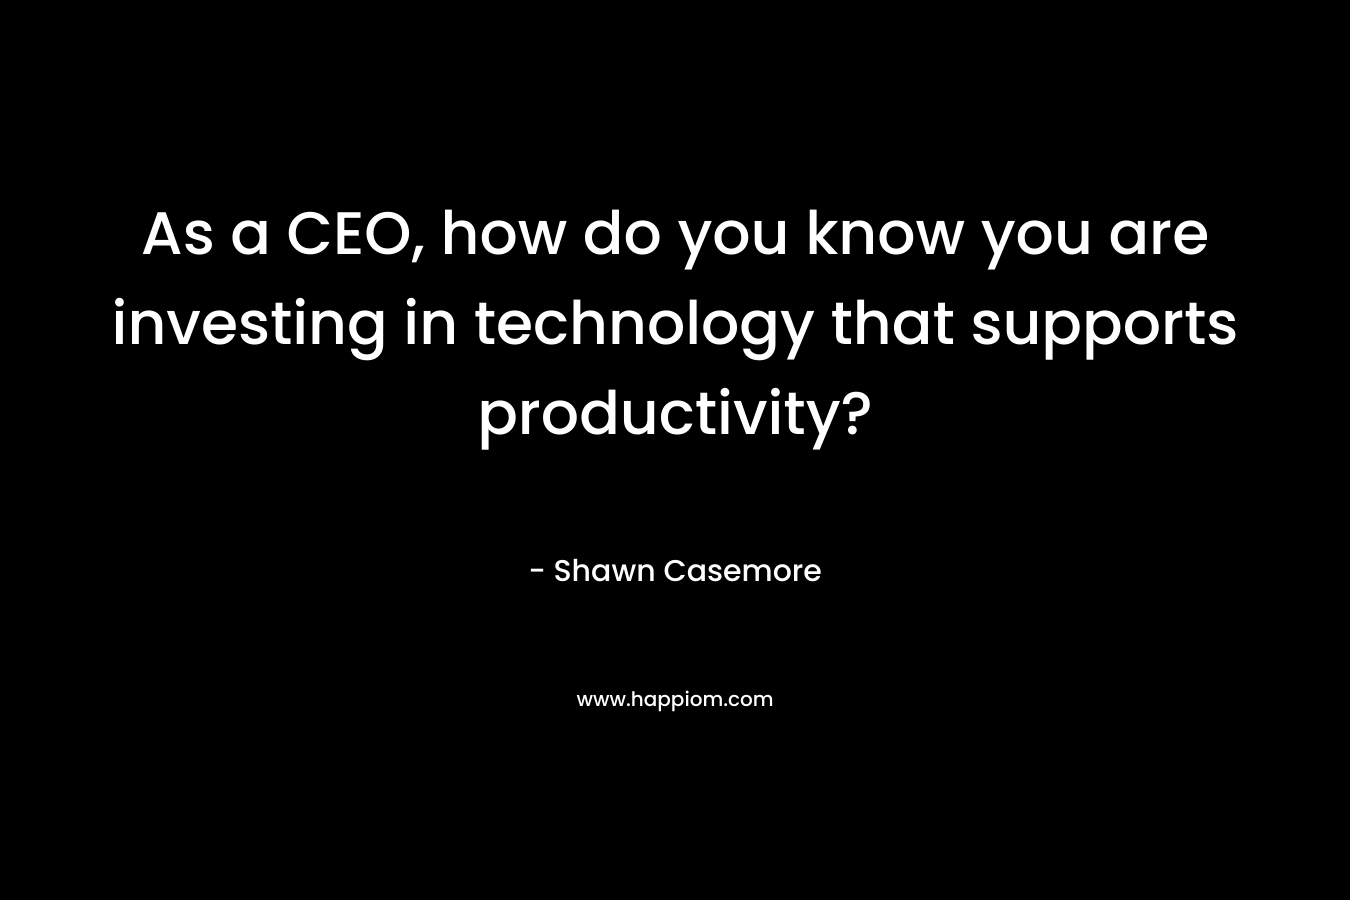 As a CEO, how do you know you are investing in technology that supports productivity? – Shawn Casemore